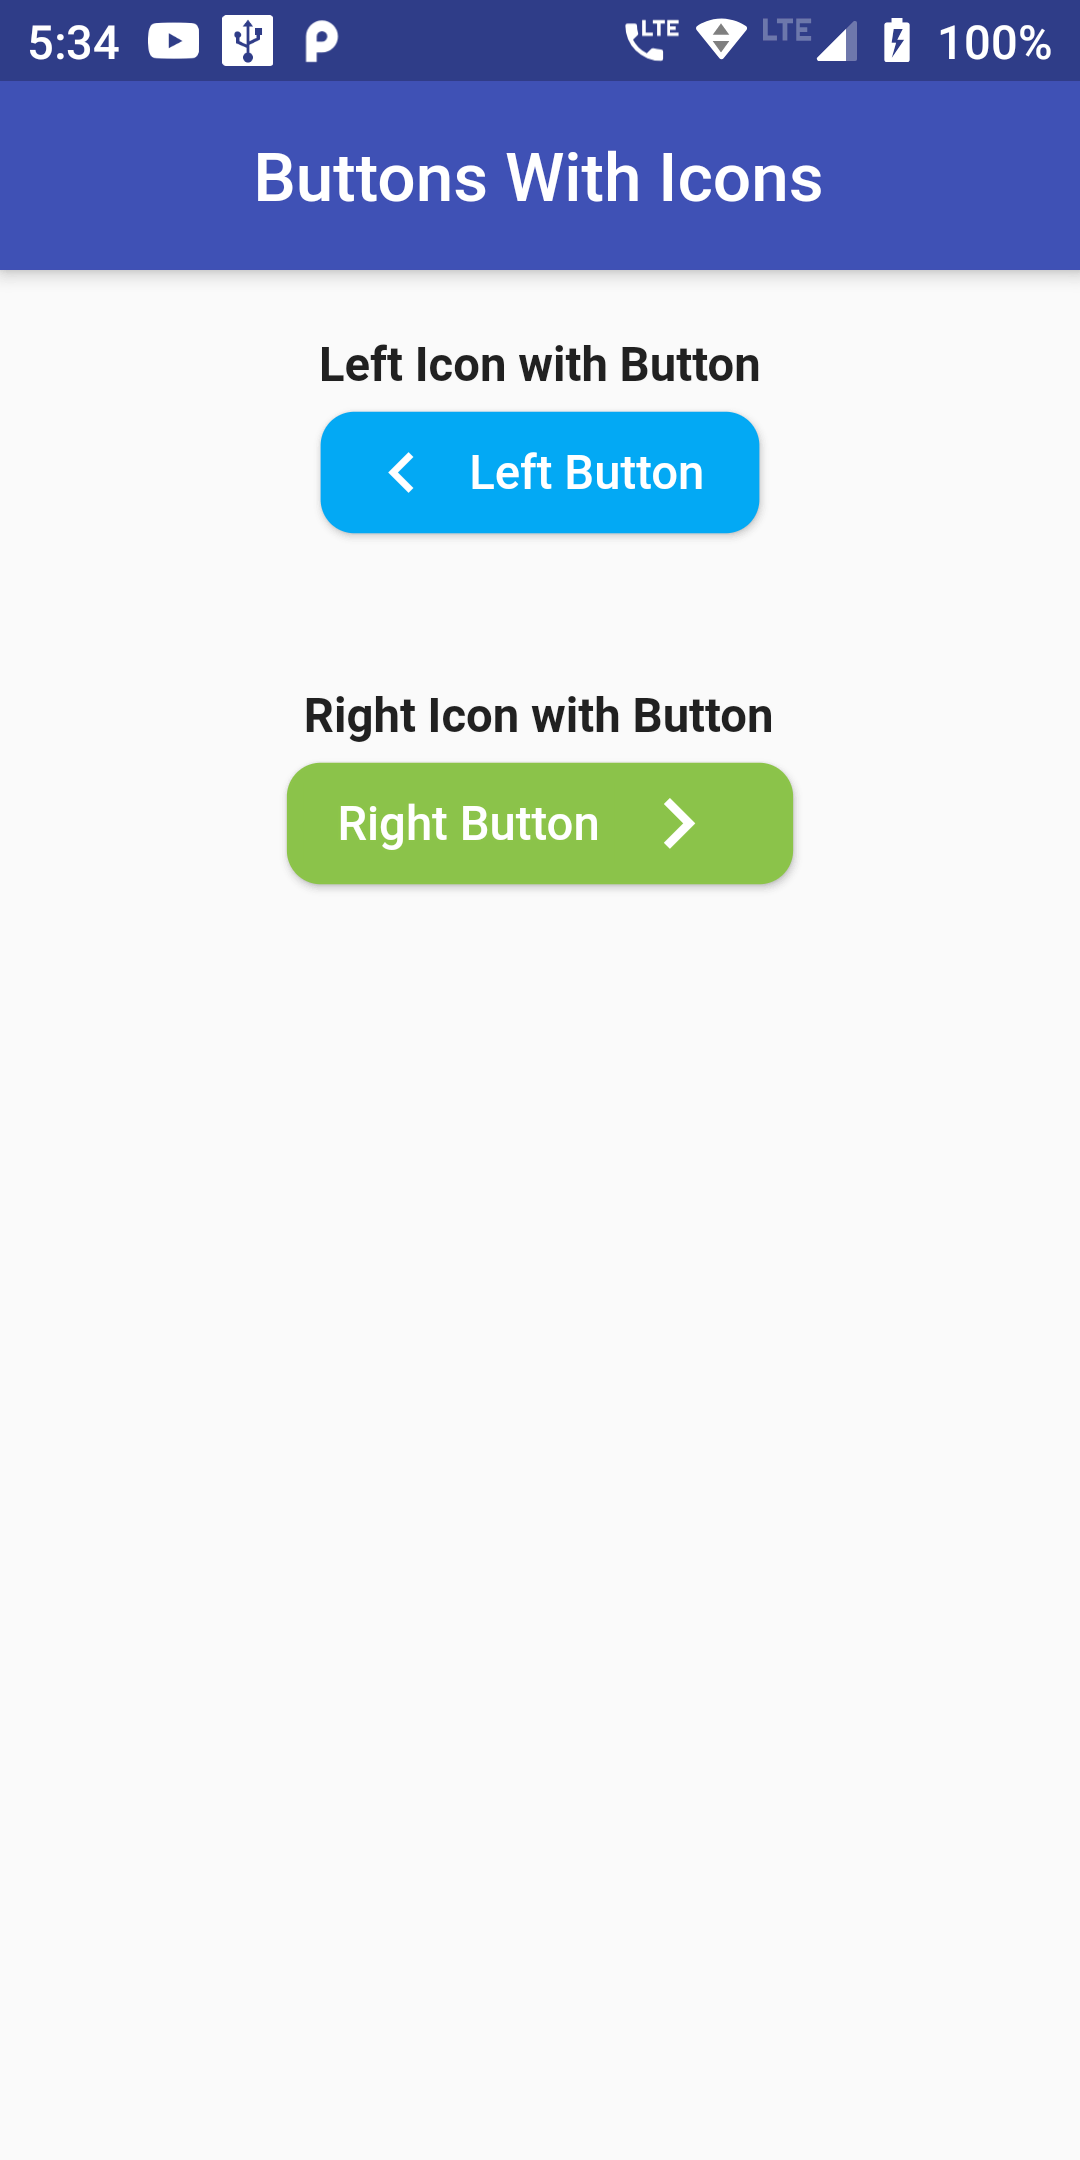 how to create icon button in flutter